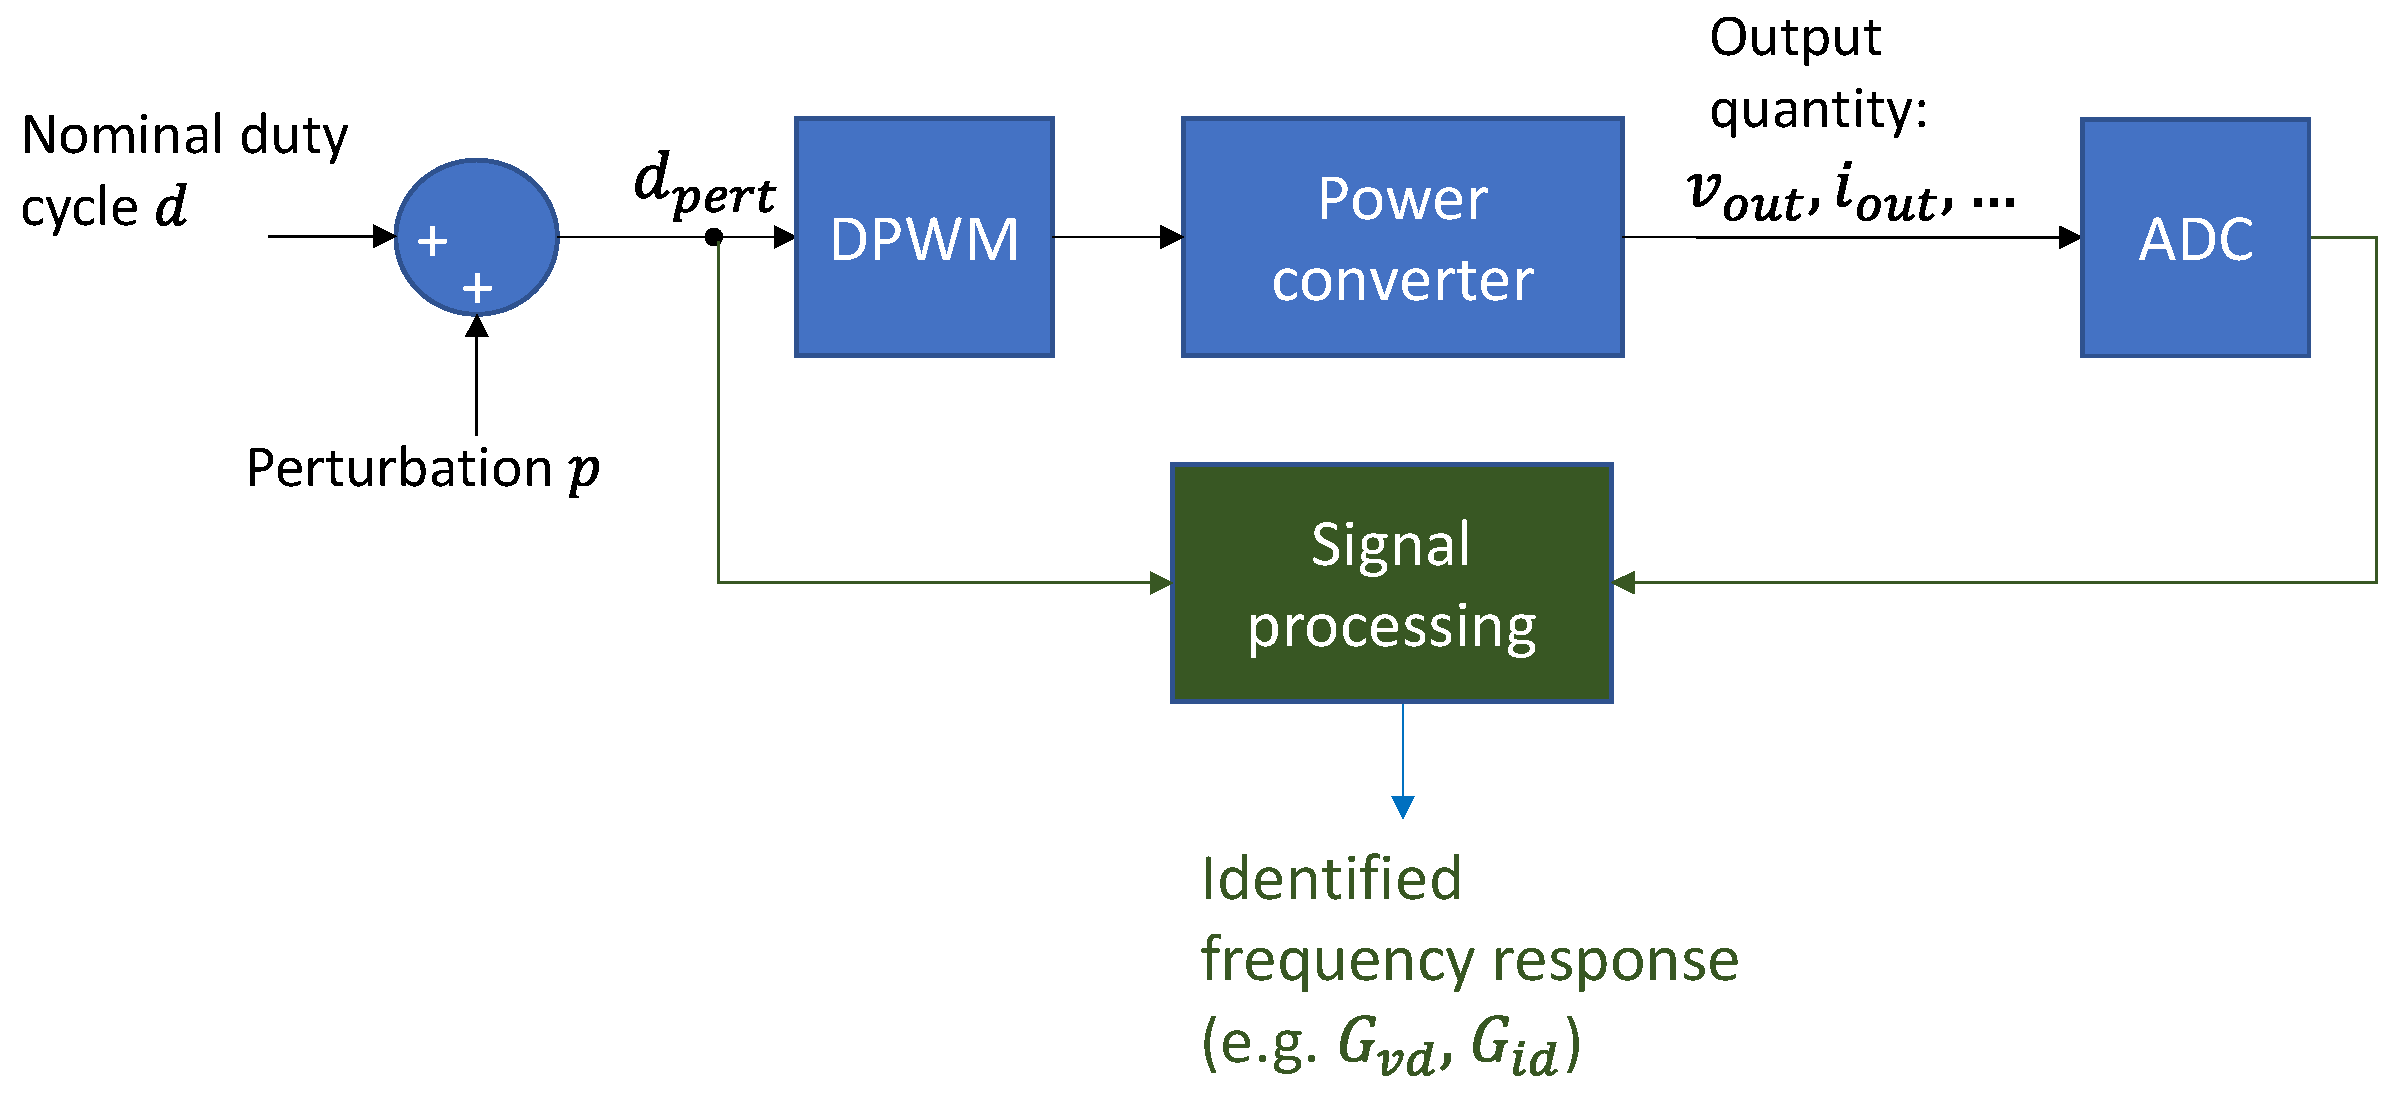 Sensors | Free Full-Text | Nonparametric Frequency Response Identification  for Dc-Dc Converters Based on Spectral Analysis with Automatic  Determination of the Perturbation Amplitude